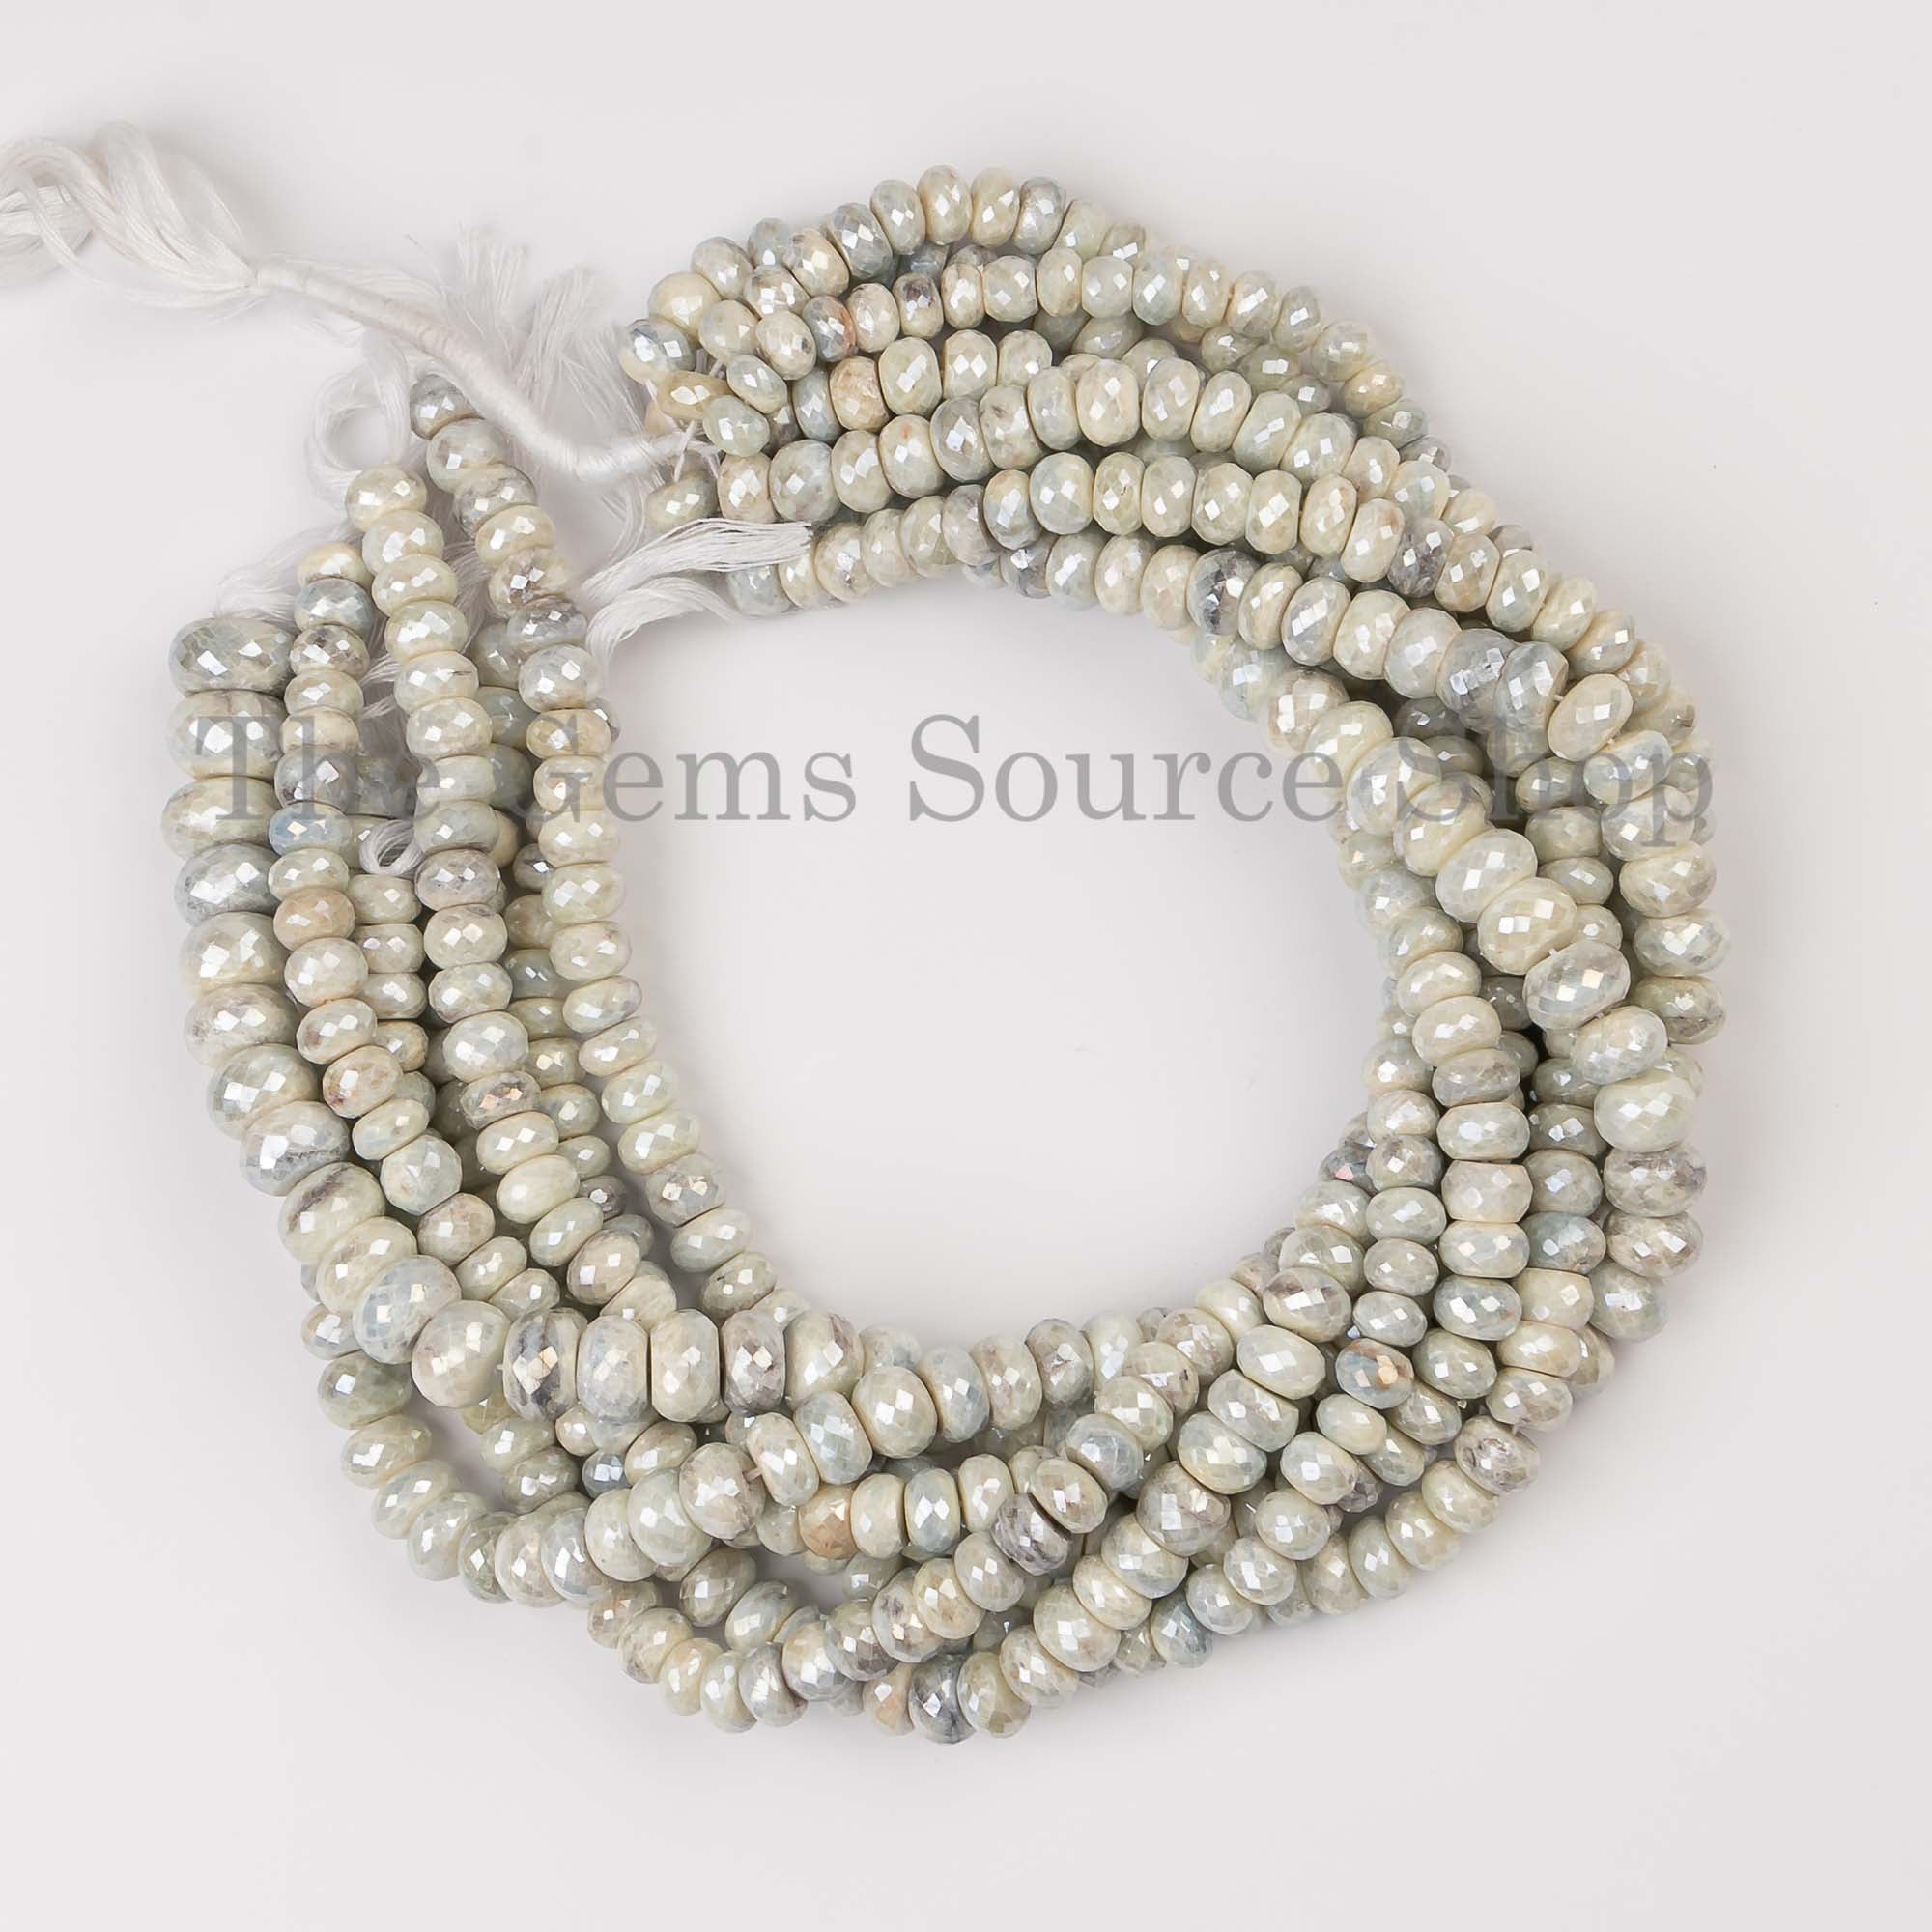 Sapphire Silverite Coated Faceted Rondelle, Coated Sapphire Beads, Sapphire Coated Faceted Beads